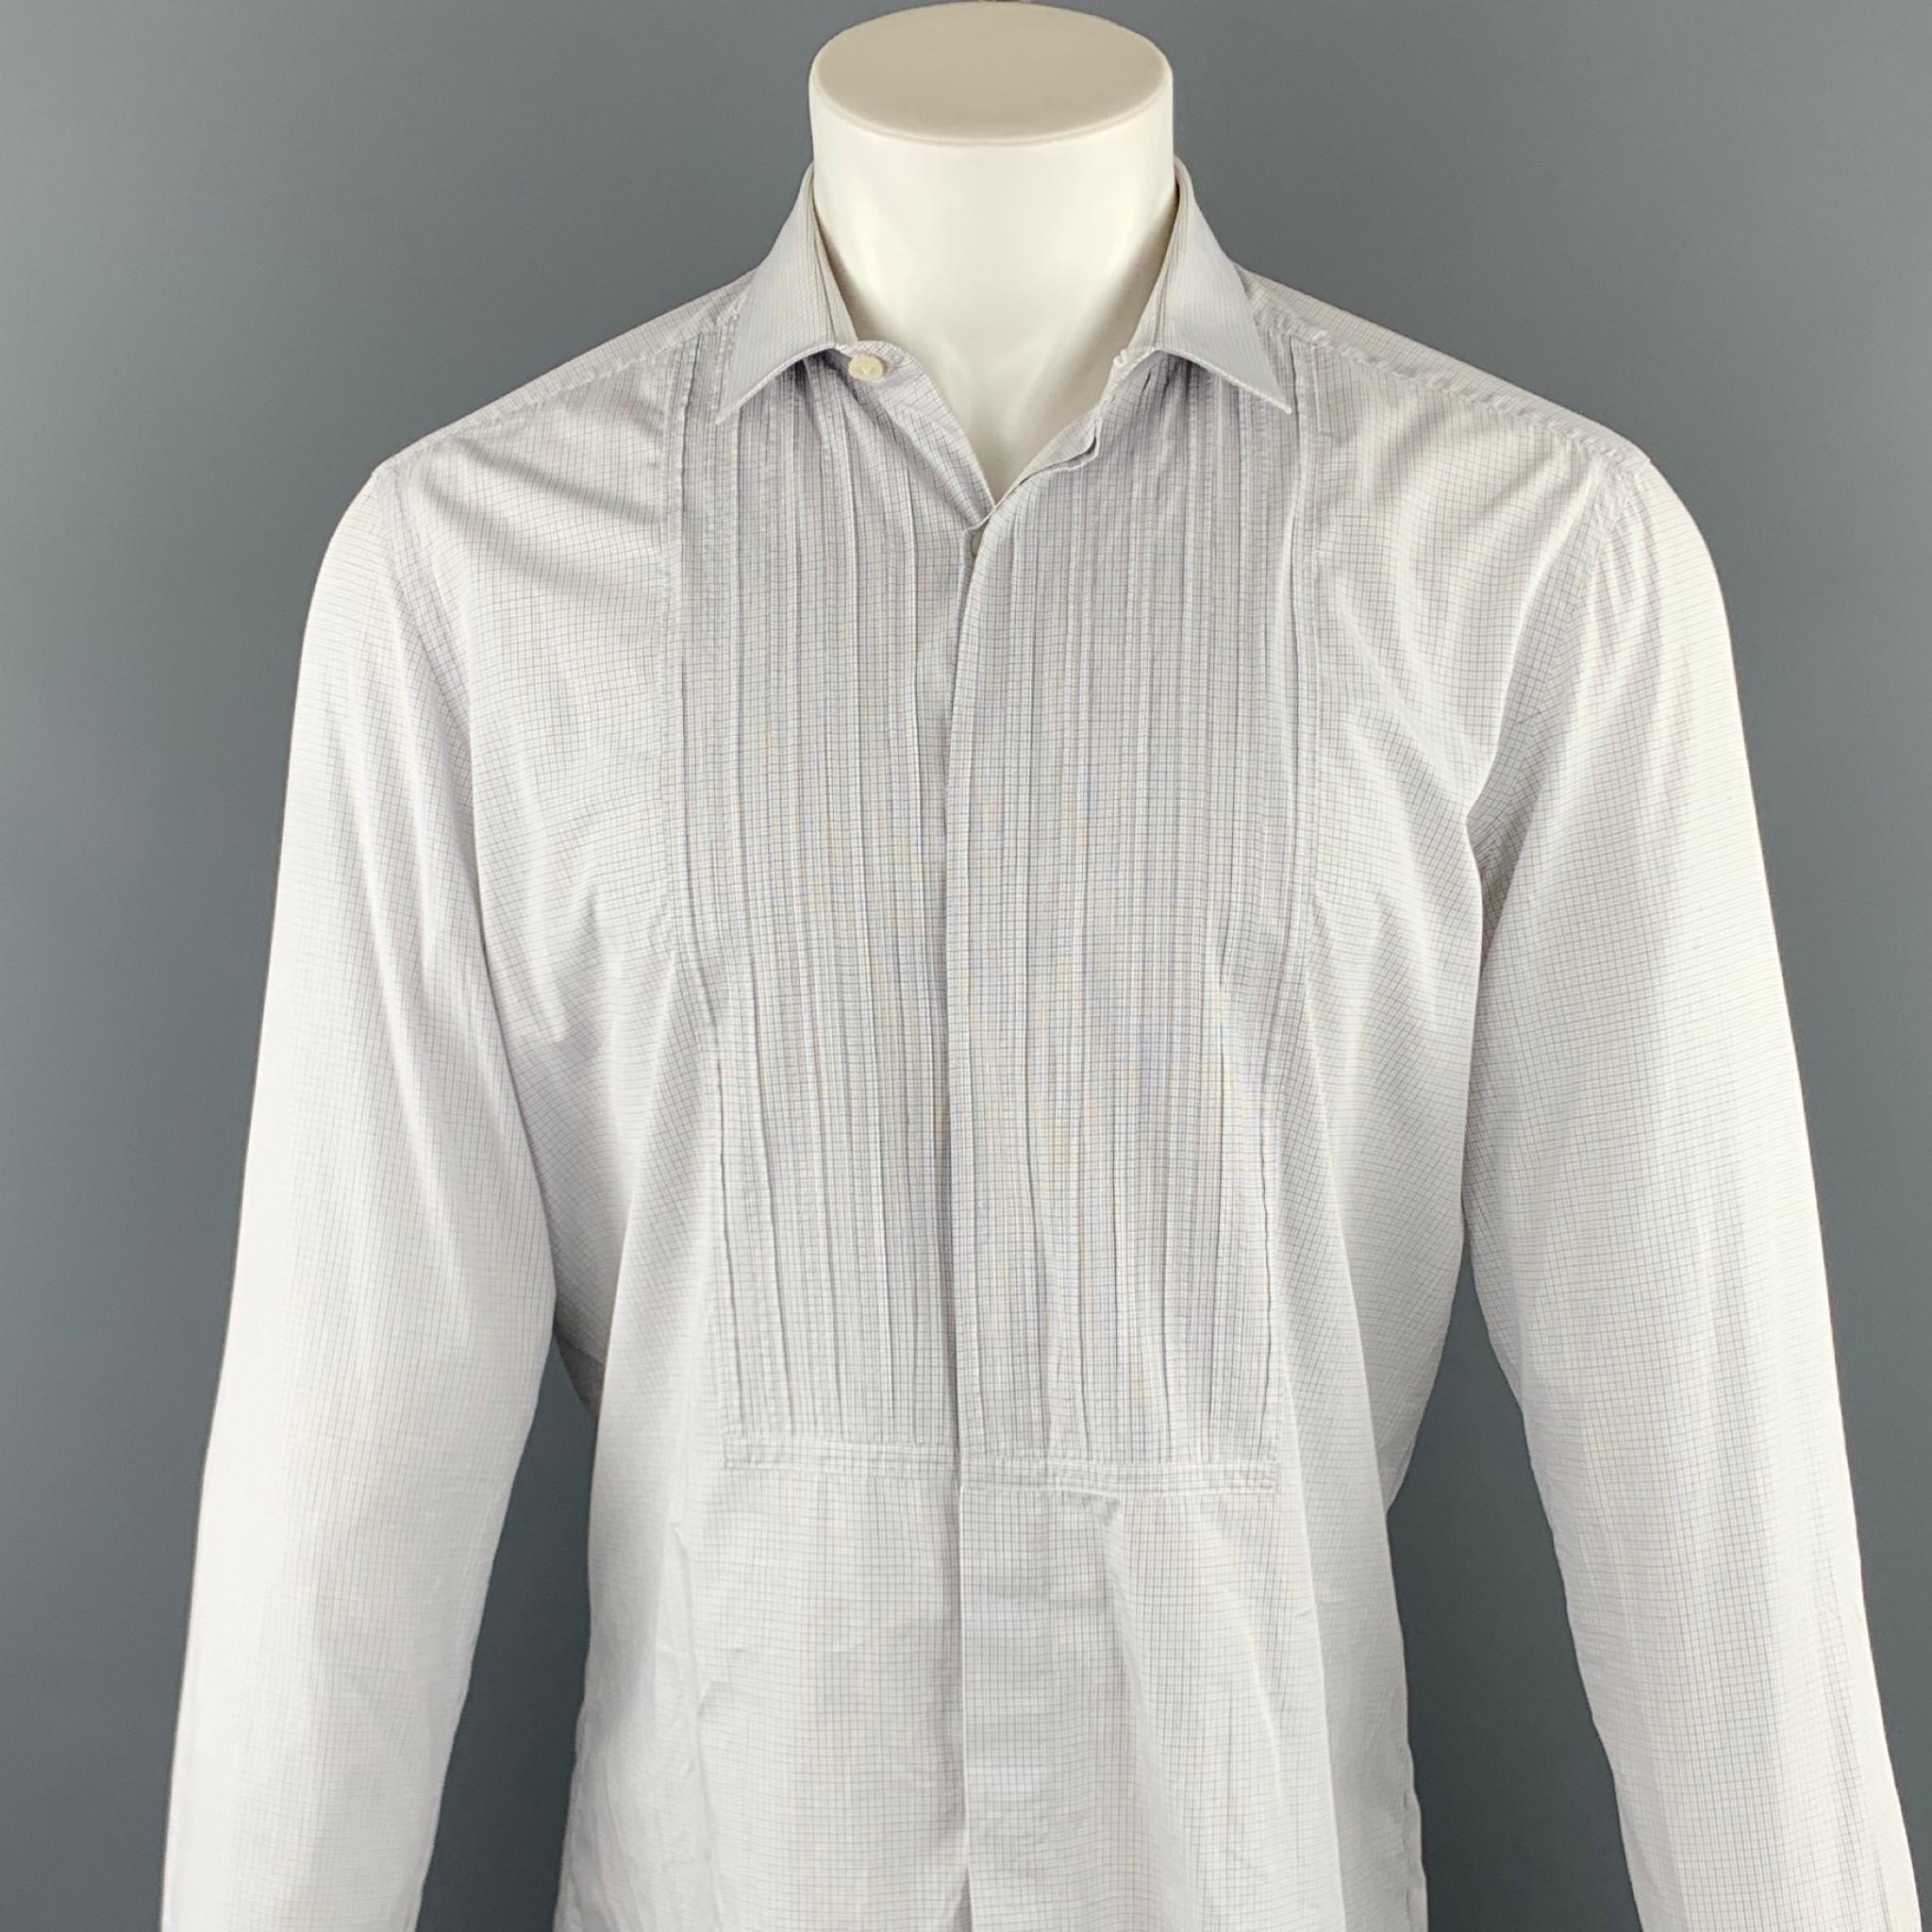 LANVIN long sleeve shirt comes in a gray window pane cotton featuring a pleated chest panel and a hidden button closure. Made in Italy.

Excellent Pre-Owned Condition.
Marked: 41/16

Measurements:

Shoulder: 16 in. 
Chest: 44 in.
Sleeve: 26.5 in.